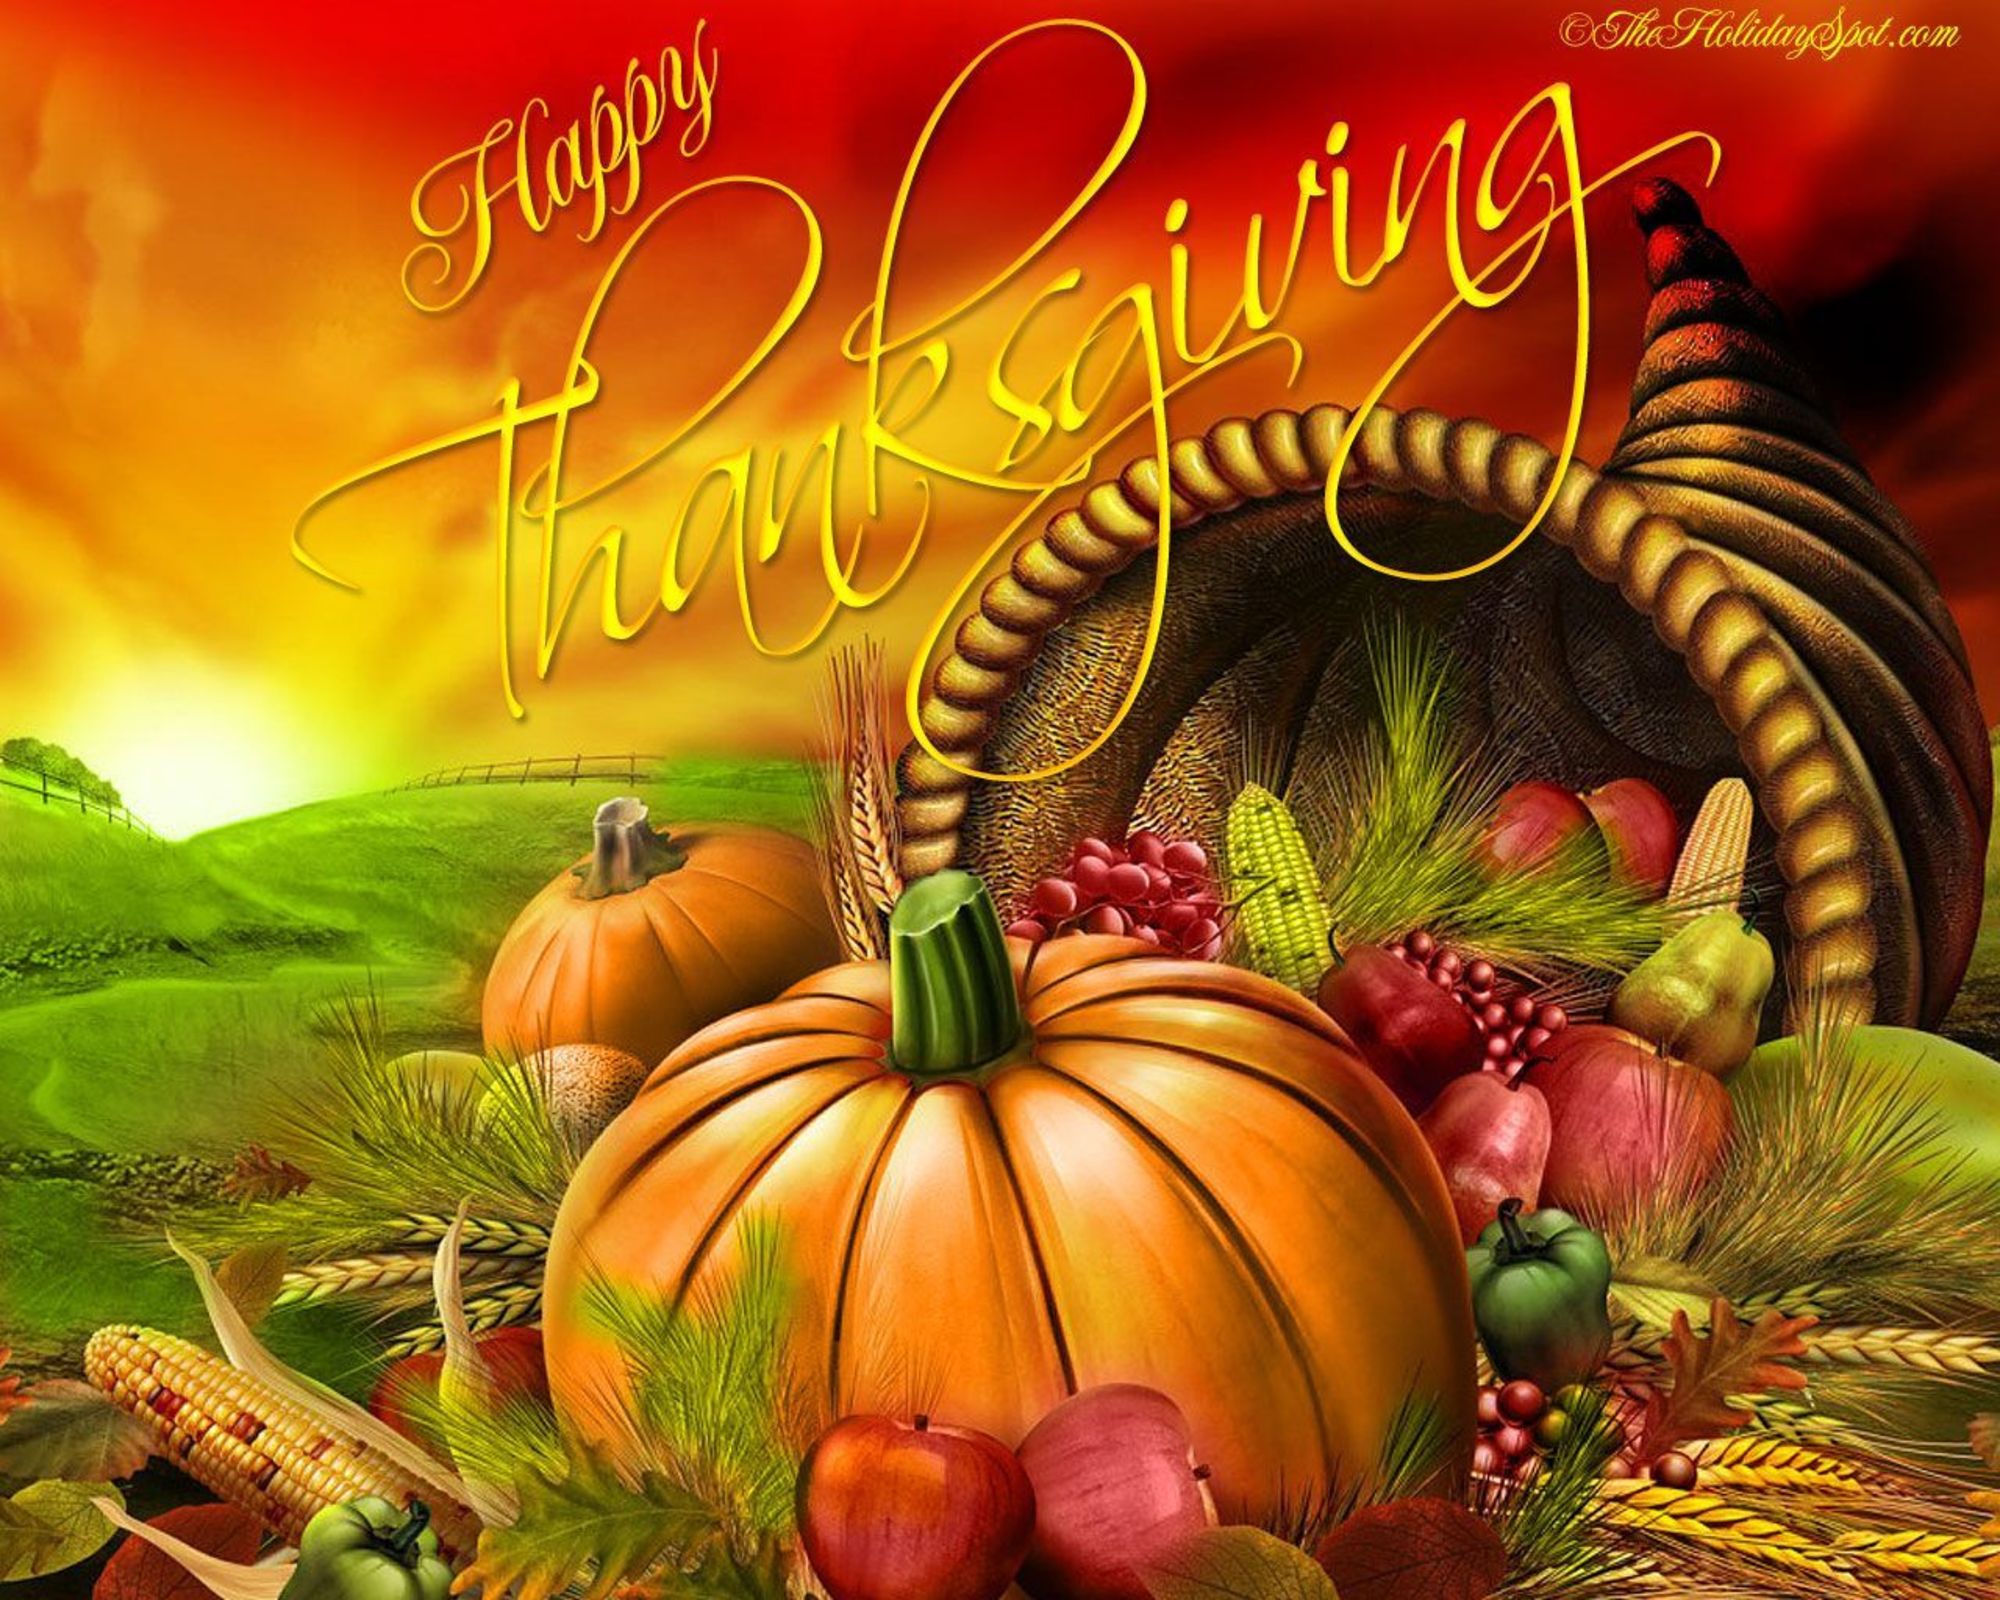 🔥 Download Happy Thanksgiving Wallpaper Background For Desktop by